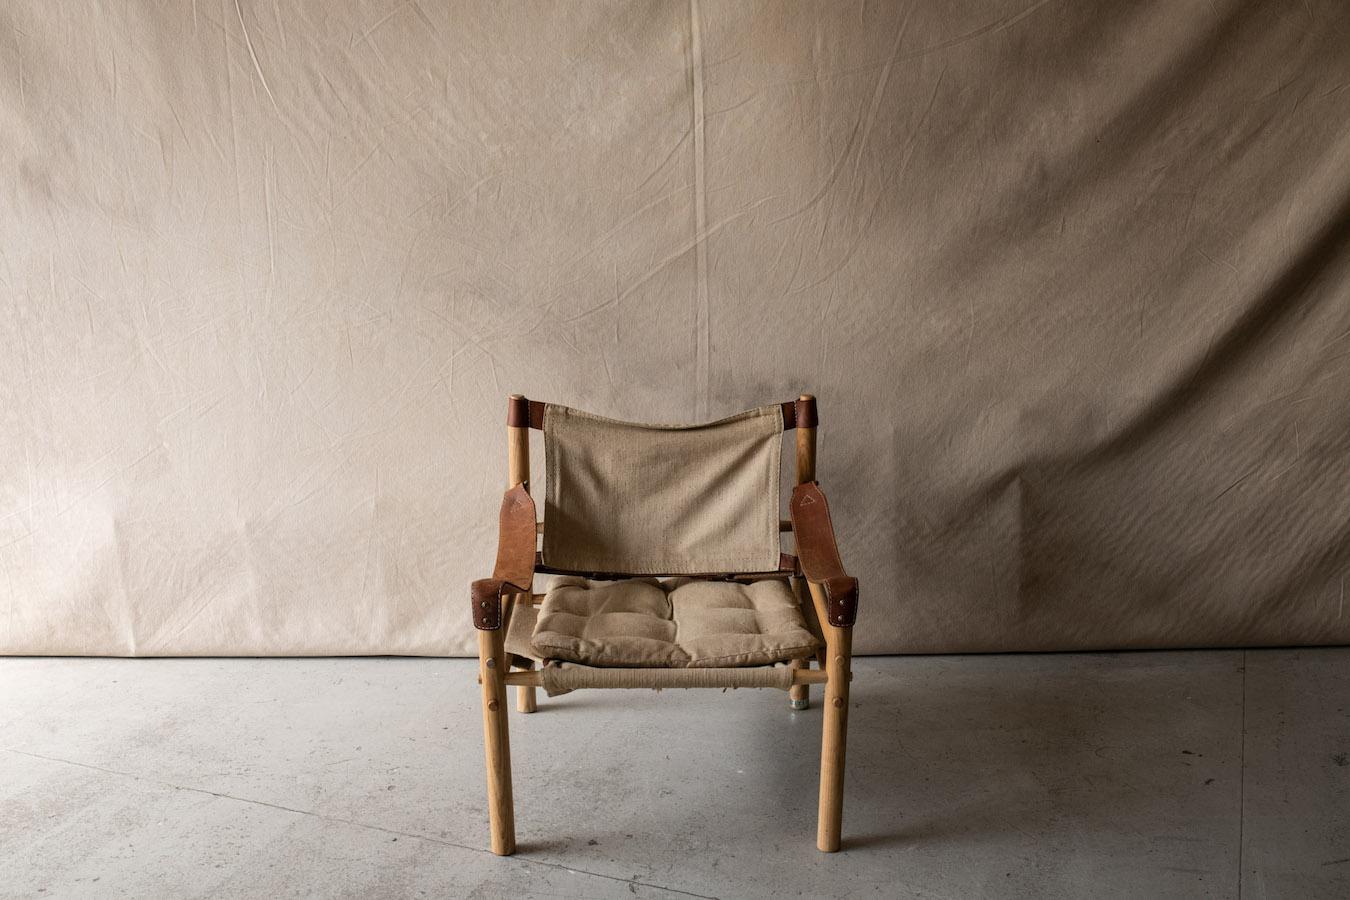 Vintage Canvas Arne Norell Lounge Chair From Sweden, Circa 1970  Original canvas and leather upholstery on an ash frame.  Designed by Arne Norell, produced by Arne Norell AB in Aneby, Sweden

We don't have the time to write an exhausting description